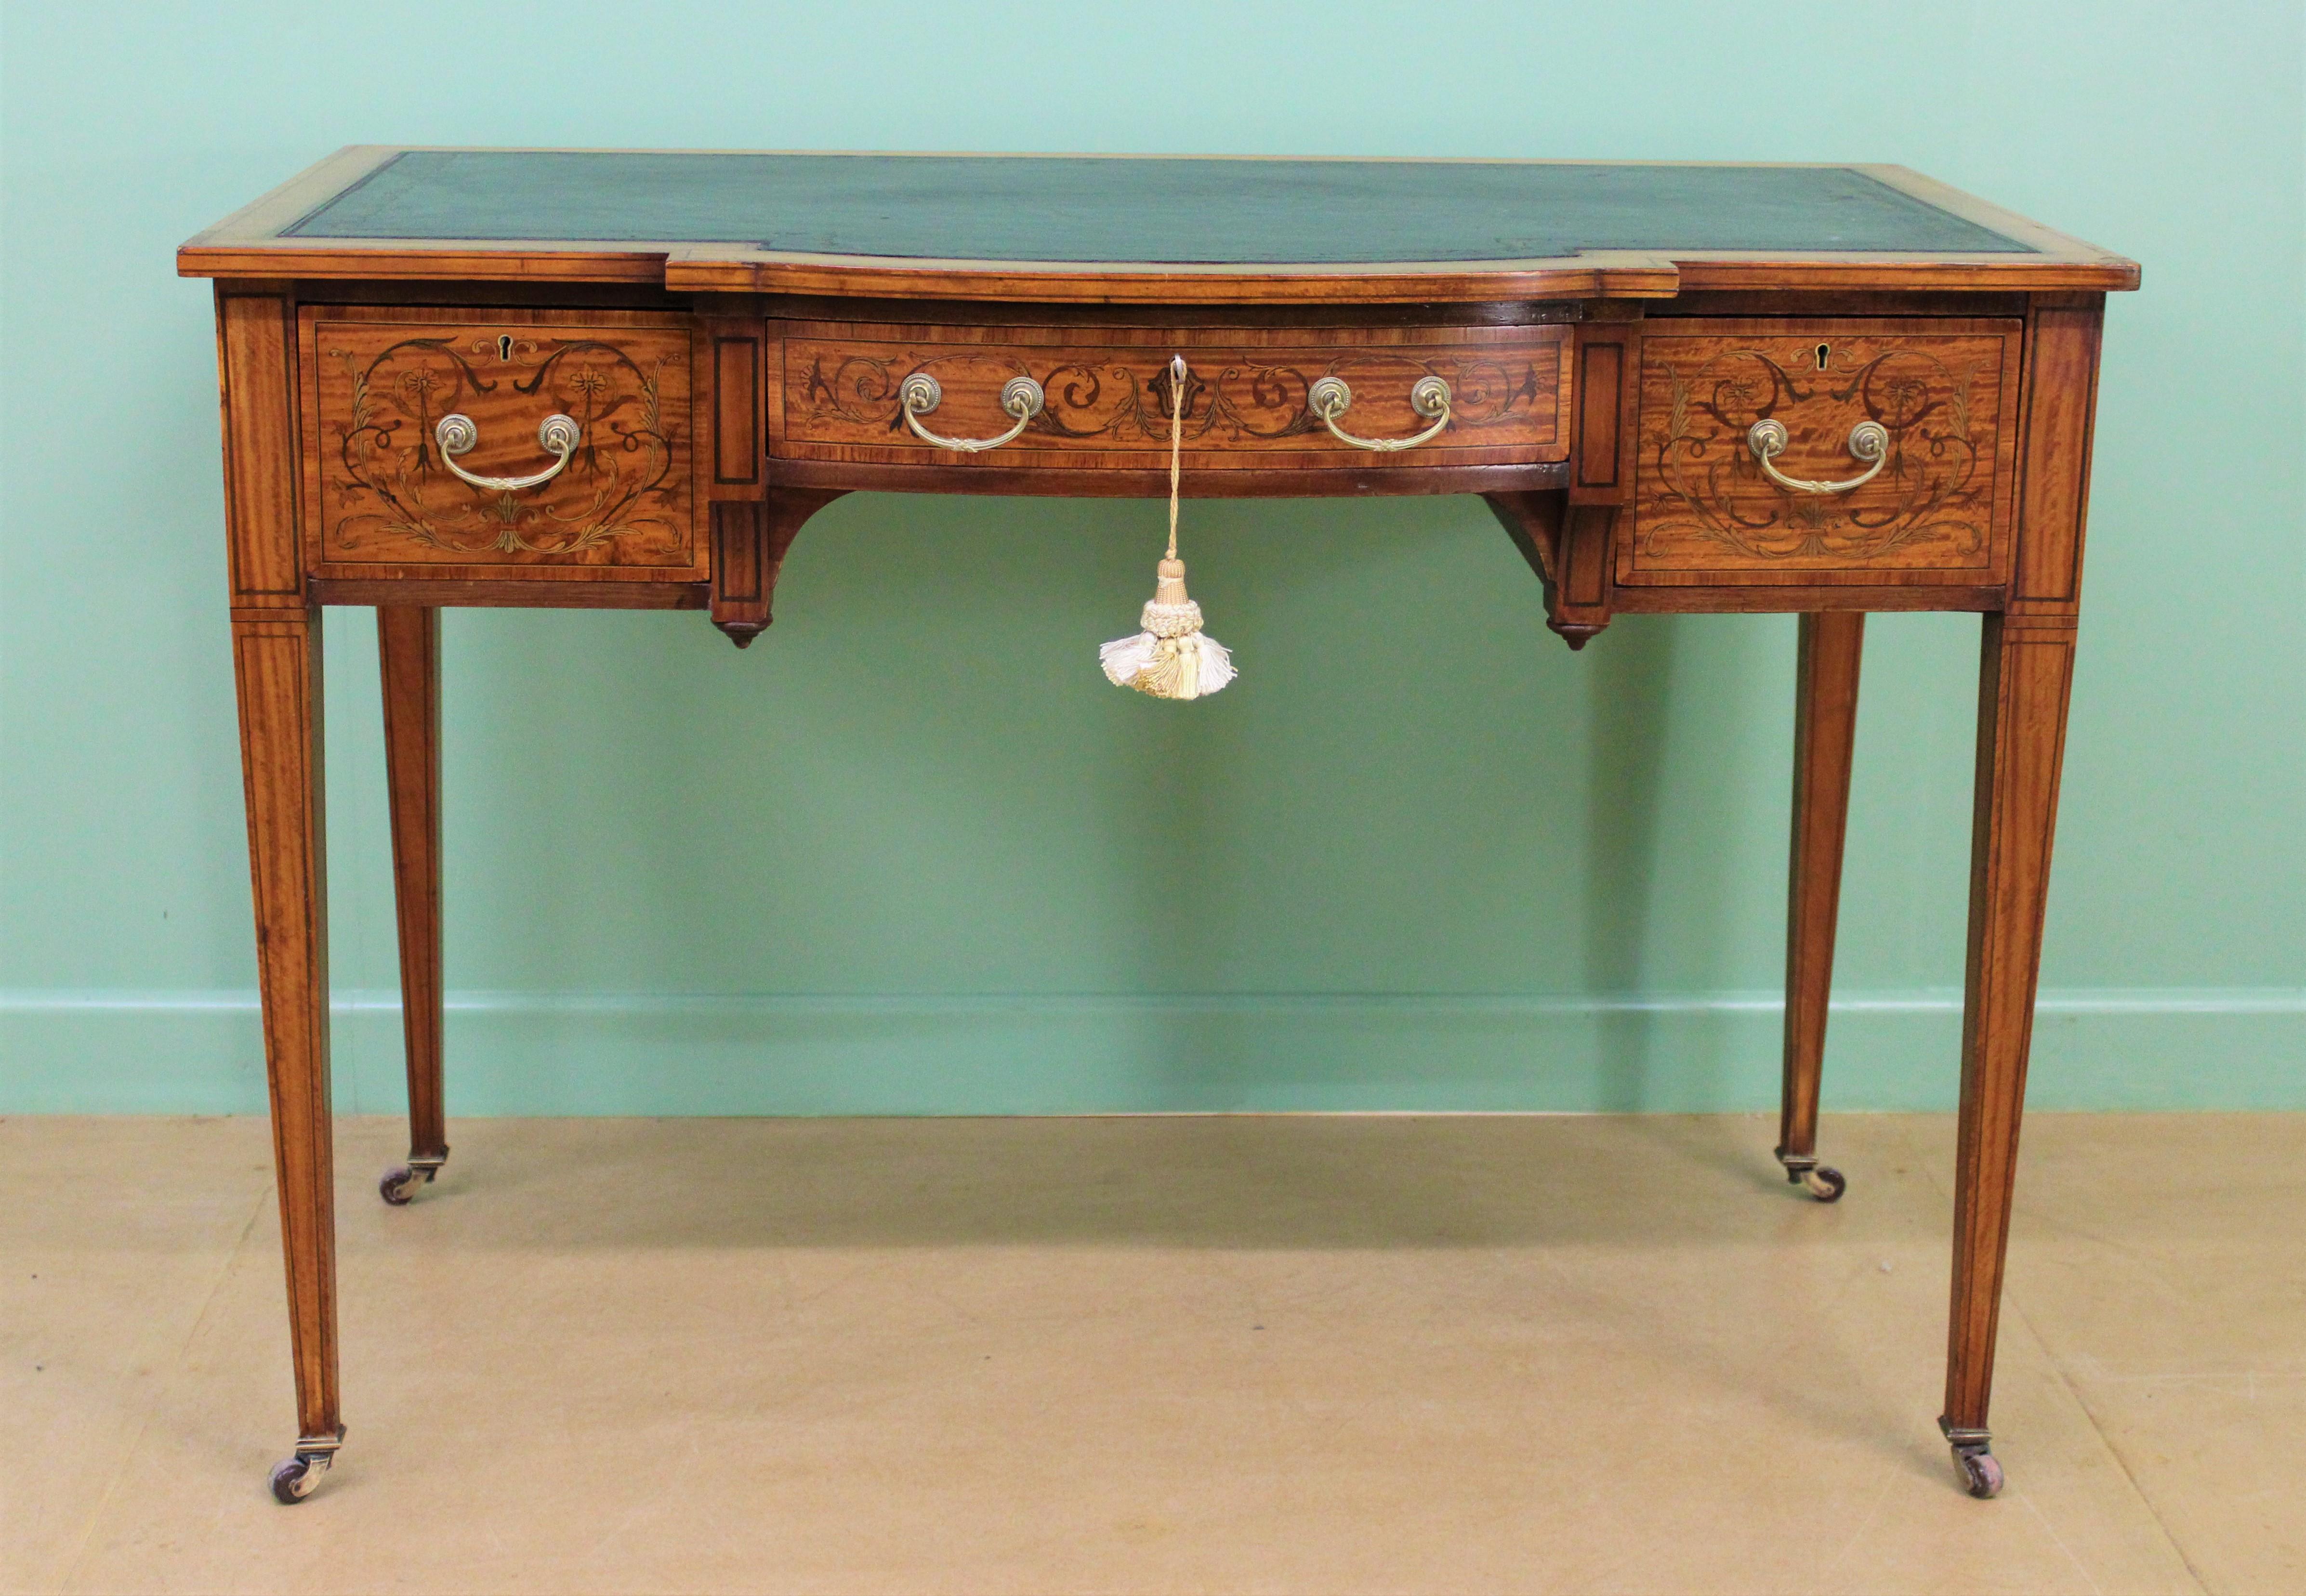 A fine quality inlaid satinwood writing table by the prestigious firm of Maple and Co of London. Dating to the late Victorian period and very well made with stunning satinwood veneers onto a solid mahogany frame. The top and drawer fronts are